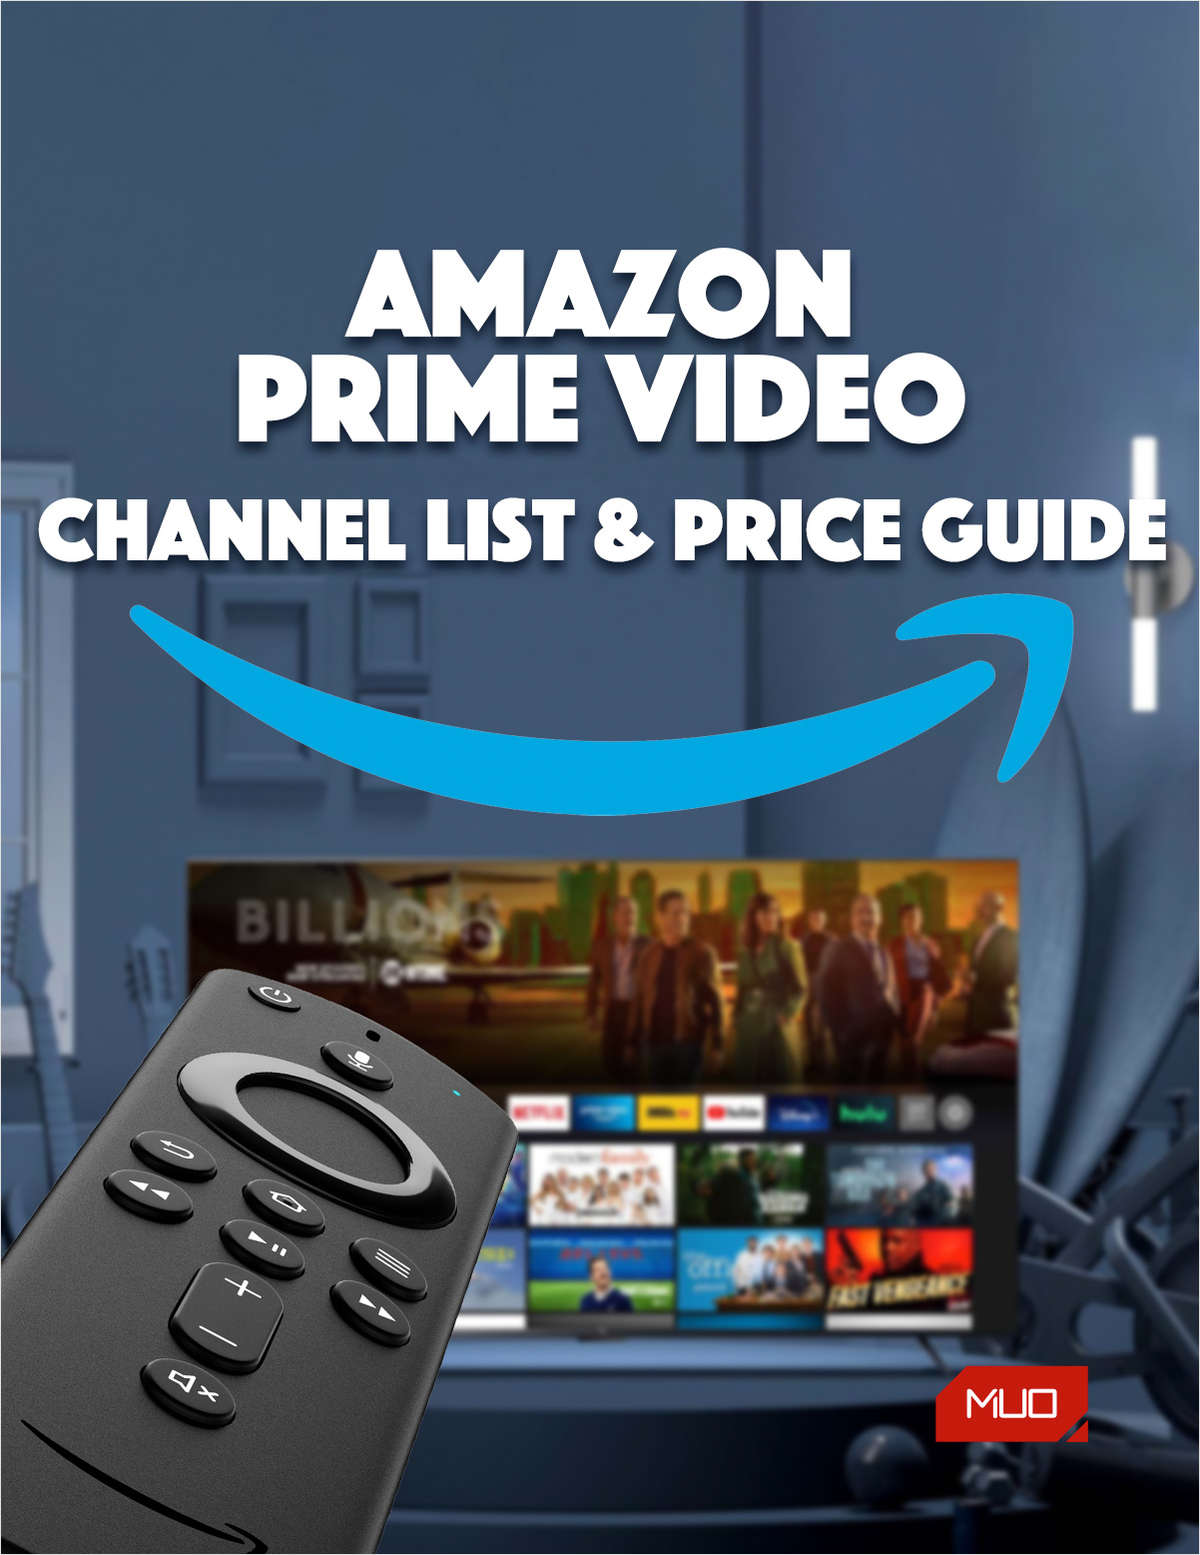 Amazon Prime Video Channel List and Price Guide